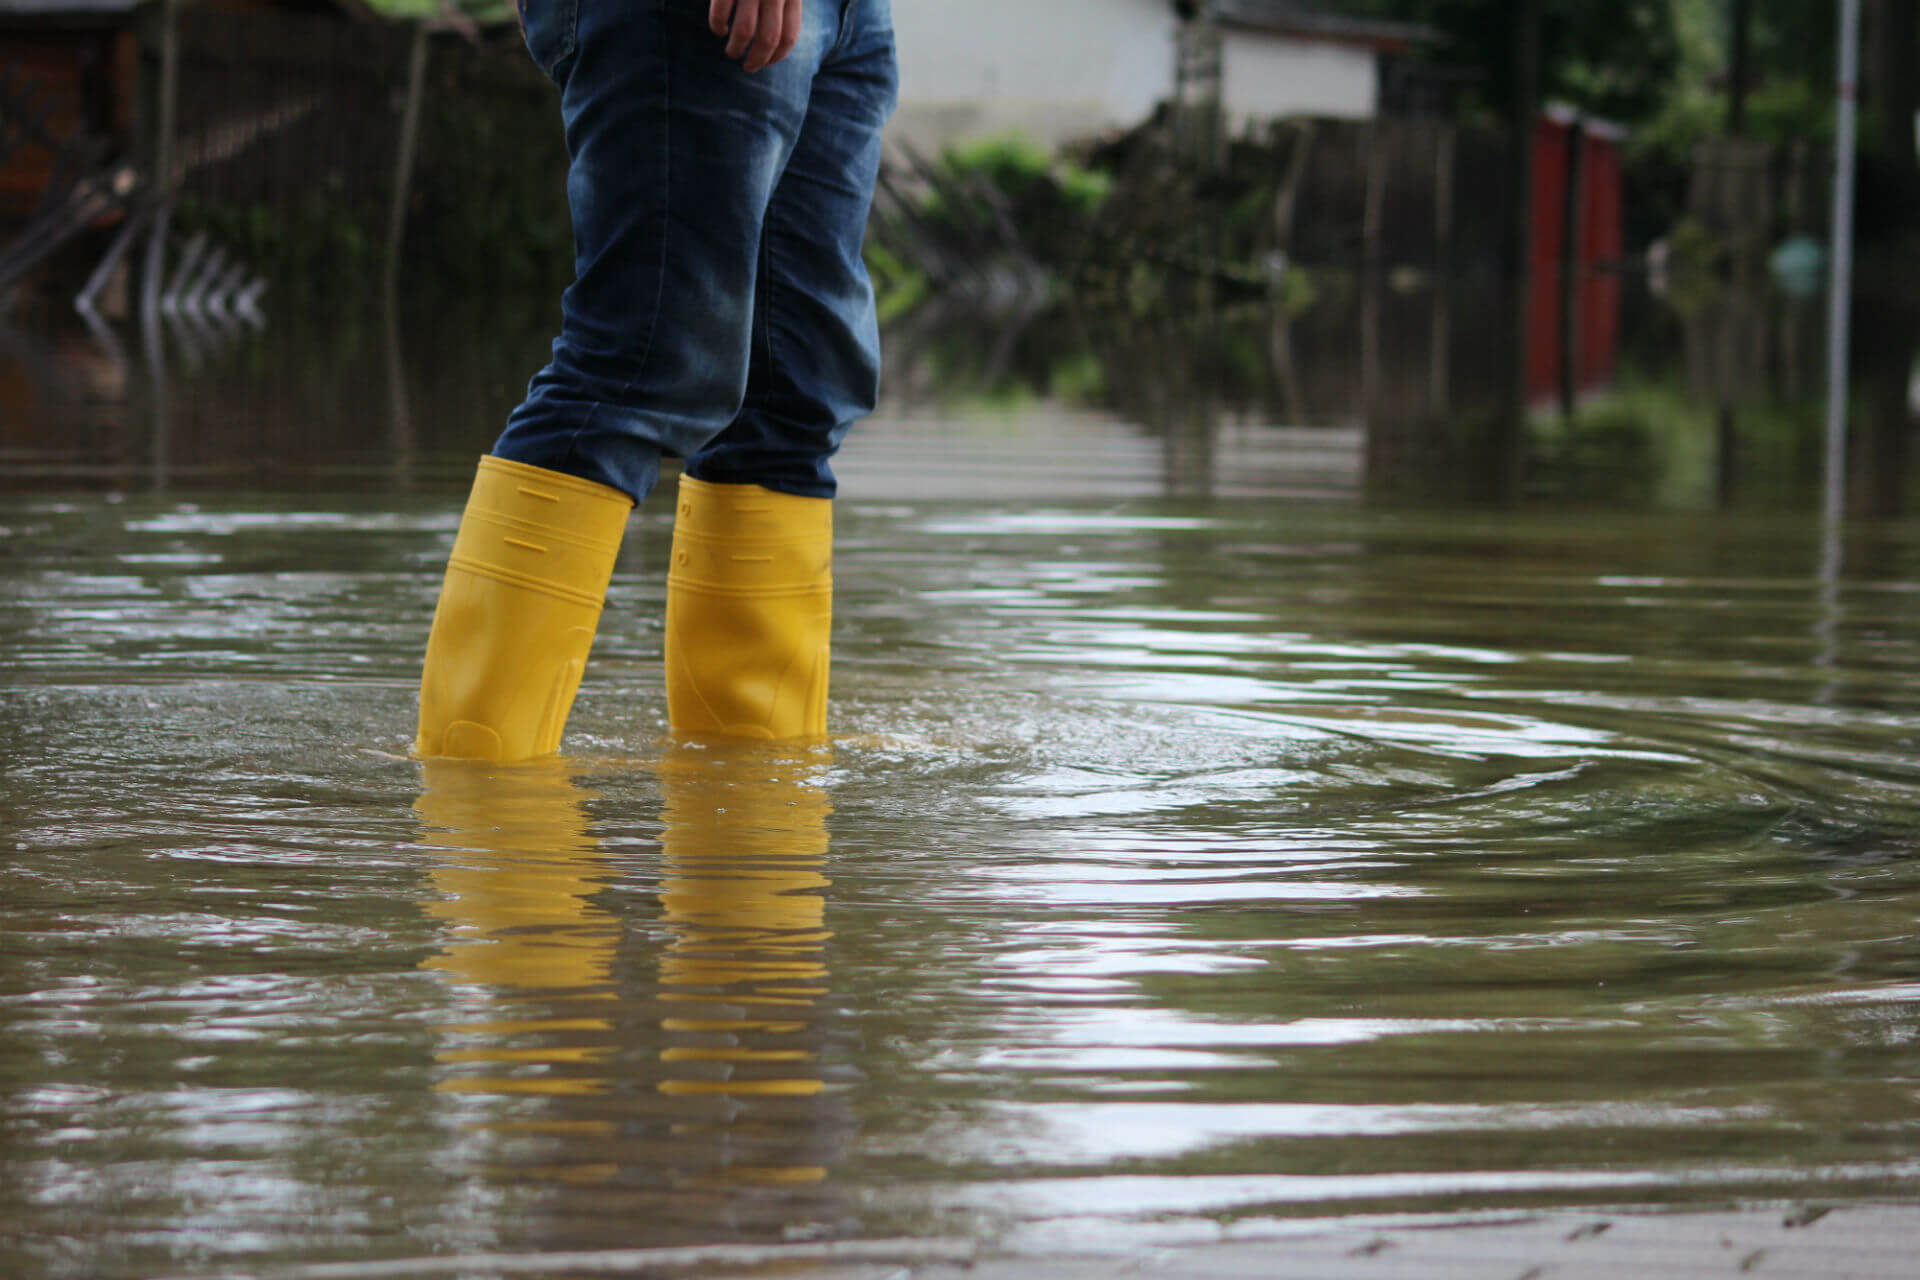 a person wearing yellow boots standing in water